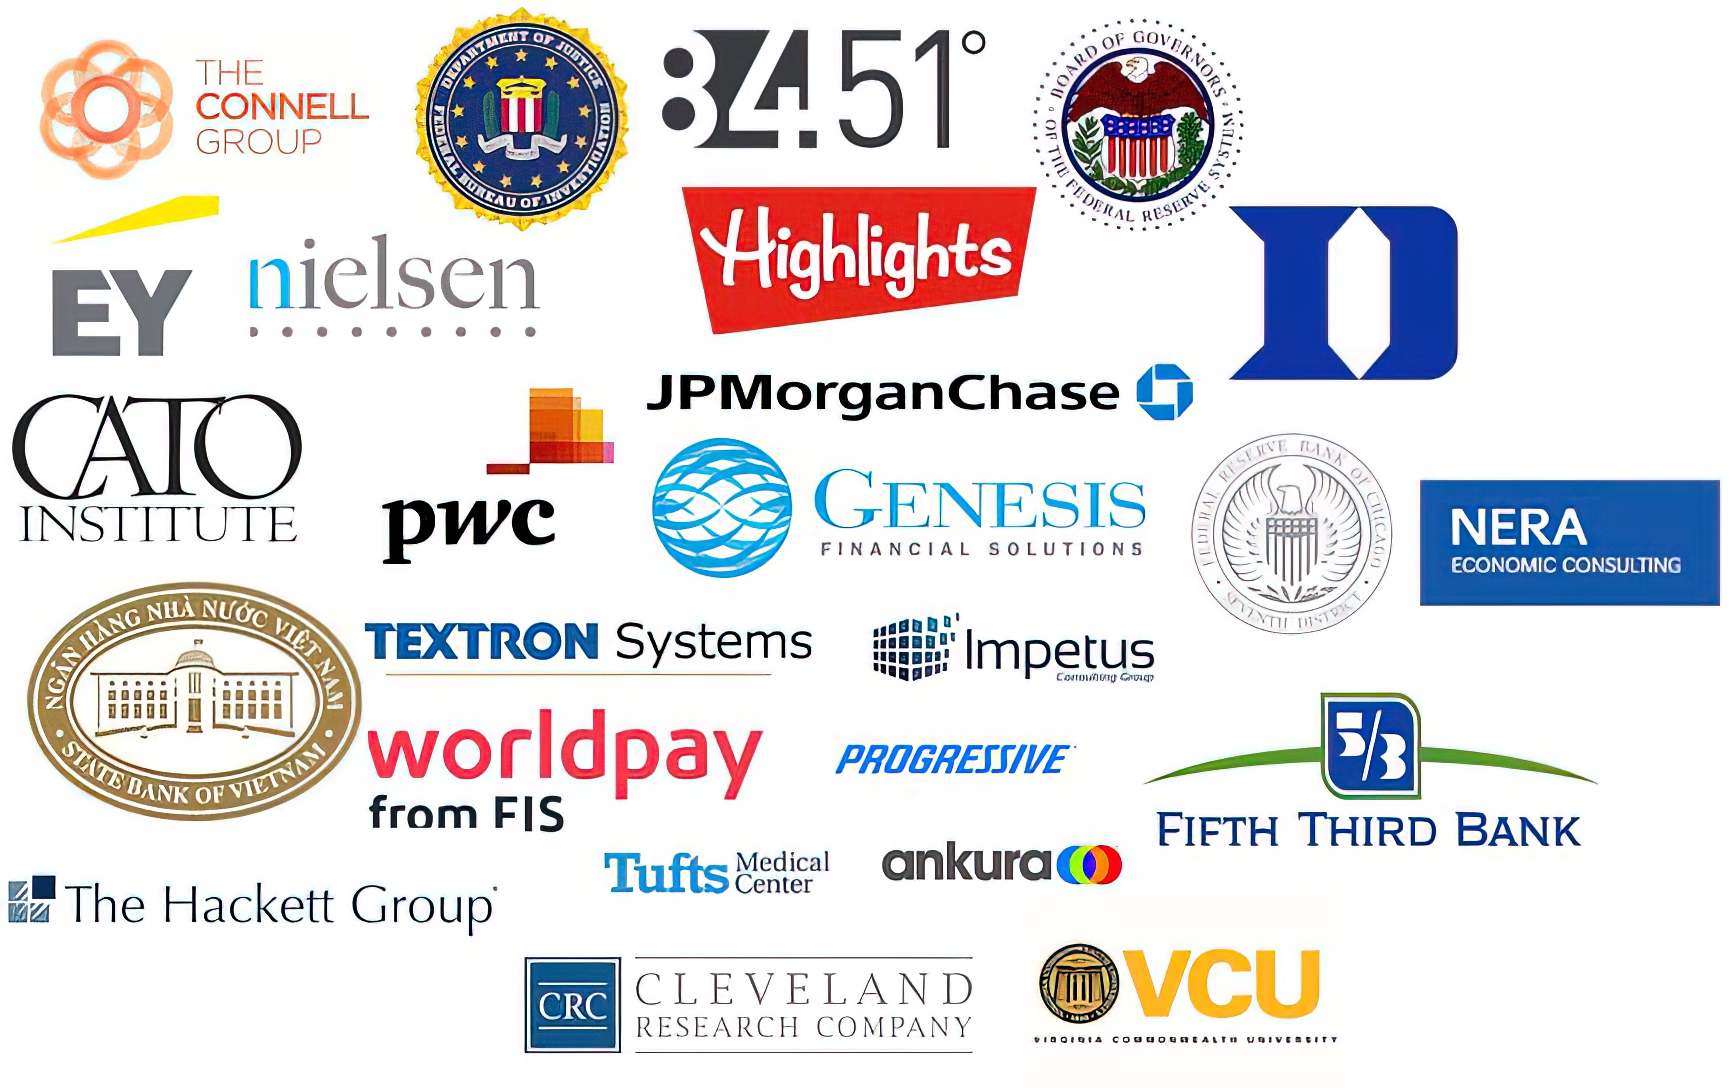 Recent 3+1 Student Placements (2014-2015 to 2018-2019): Federal Reserve Board of Governors, Deloitte, Worldpay, Textron Systems, JPMorgan Chase, NERA Economic Consulting, FBI, Federal Reserve Bank of Chicago, Genesis Financial Solutions, PwC Corporate Finance, Highlights for Children, The Connel Group, Central Bank of Vietnam, Cato Institute, Nielsen, Fifth Third Bank, EY, Virginia Commonwealth University, Duke University Law School.